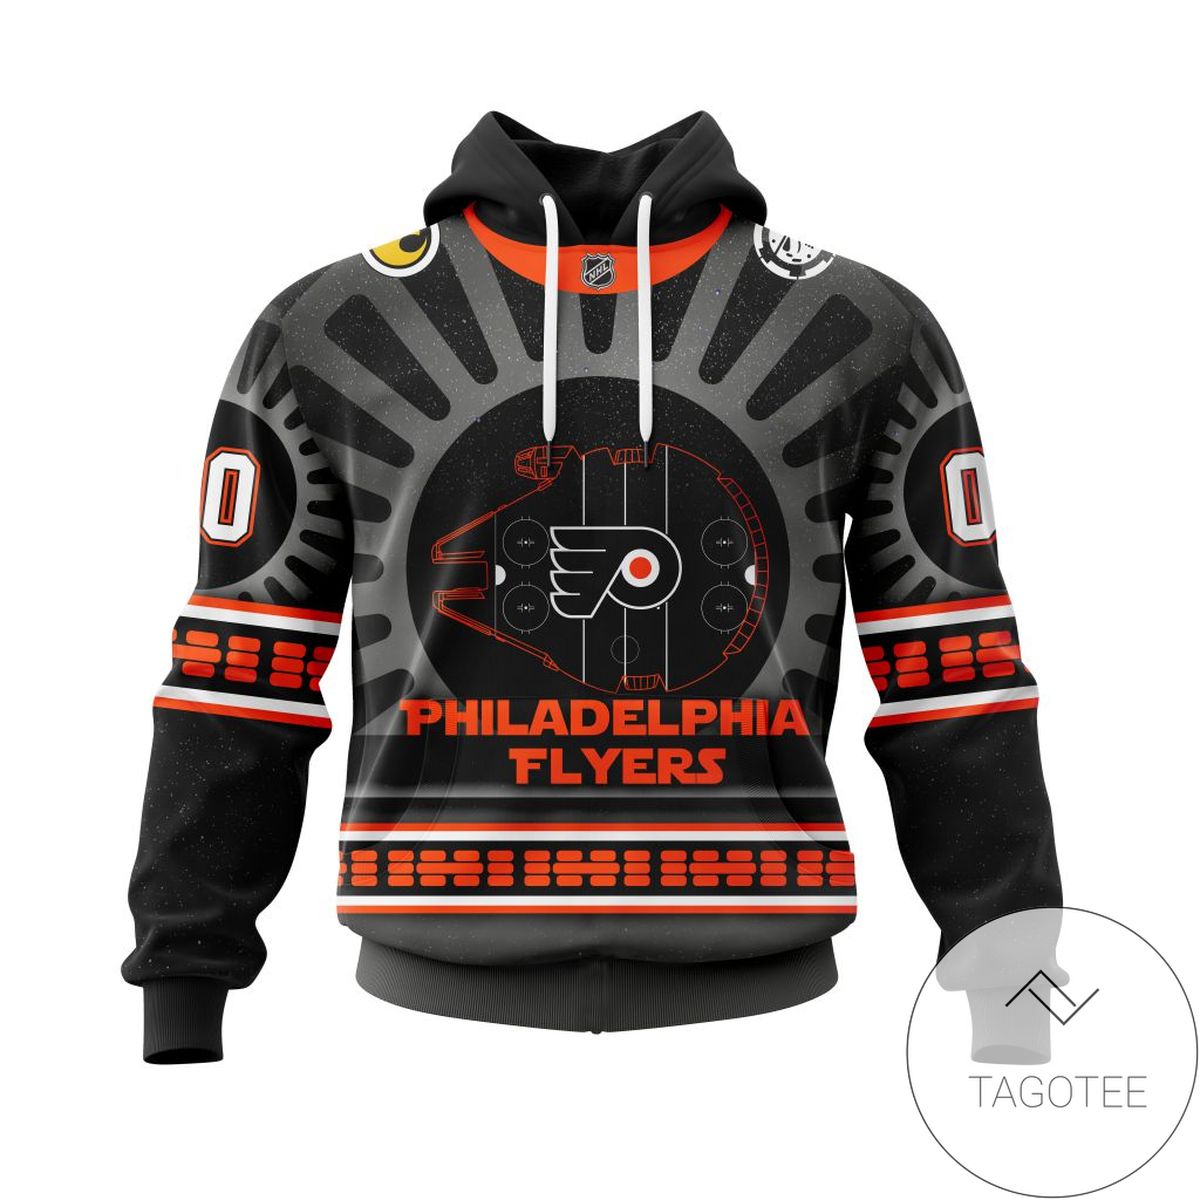 NHL Philadelphia Flyers Star Wars May The 4th Be With You Black Version Personalized Jersey Hoodie T-shirt Jacket